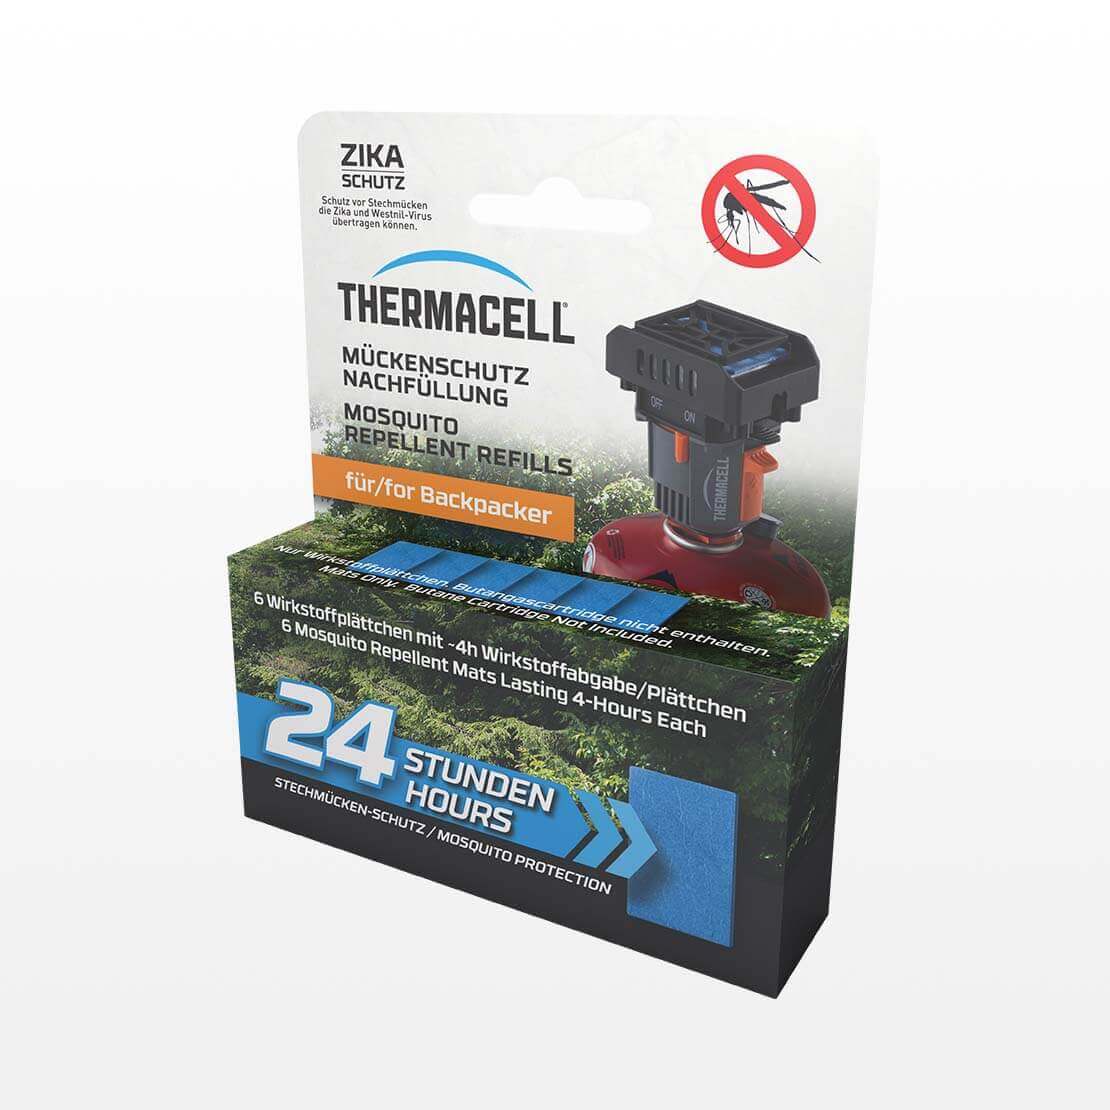 Thermacell Backpacker Nachfüllpack 24 h